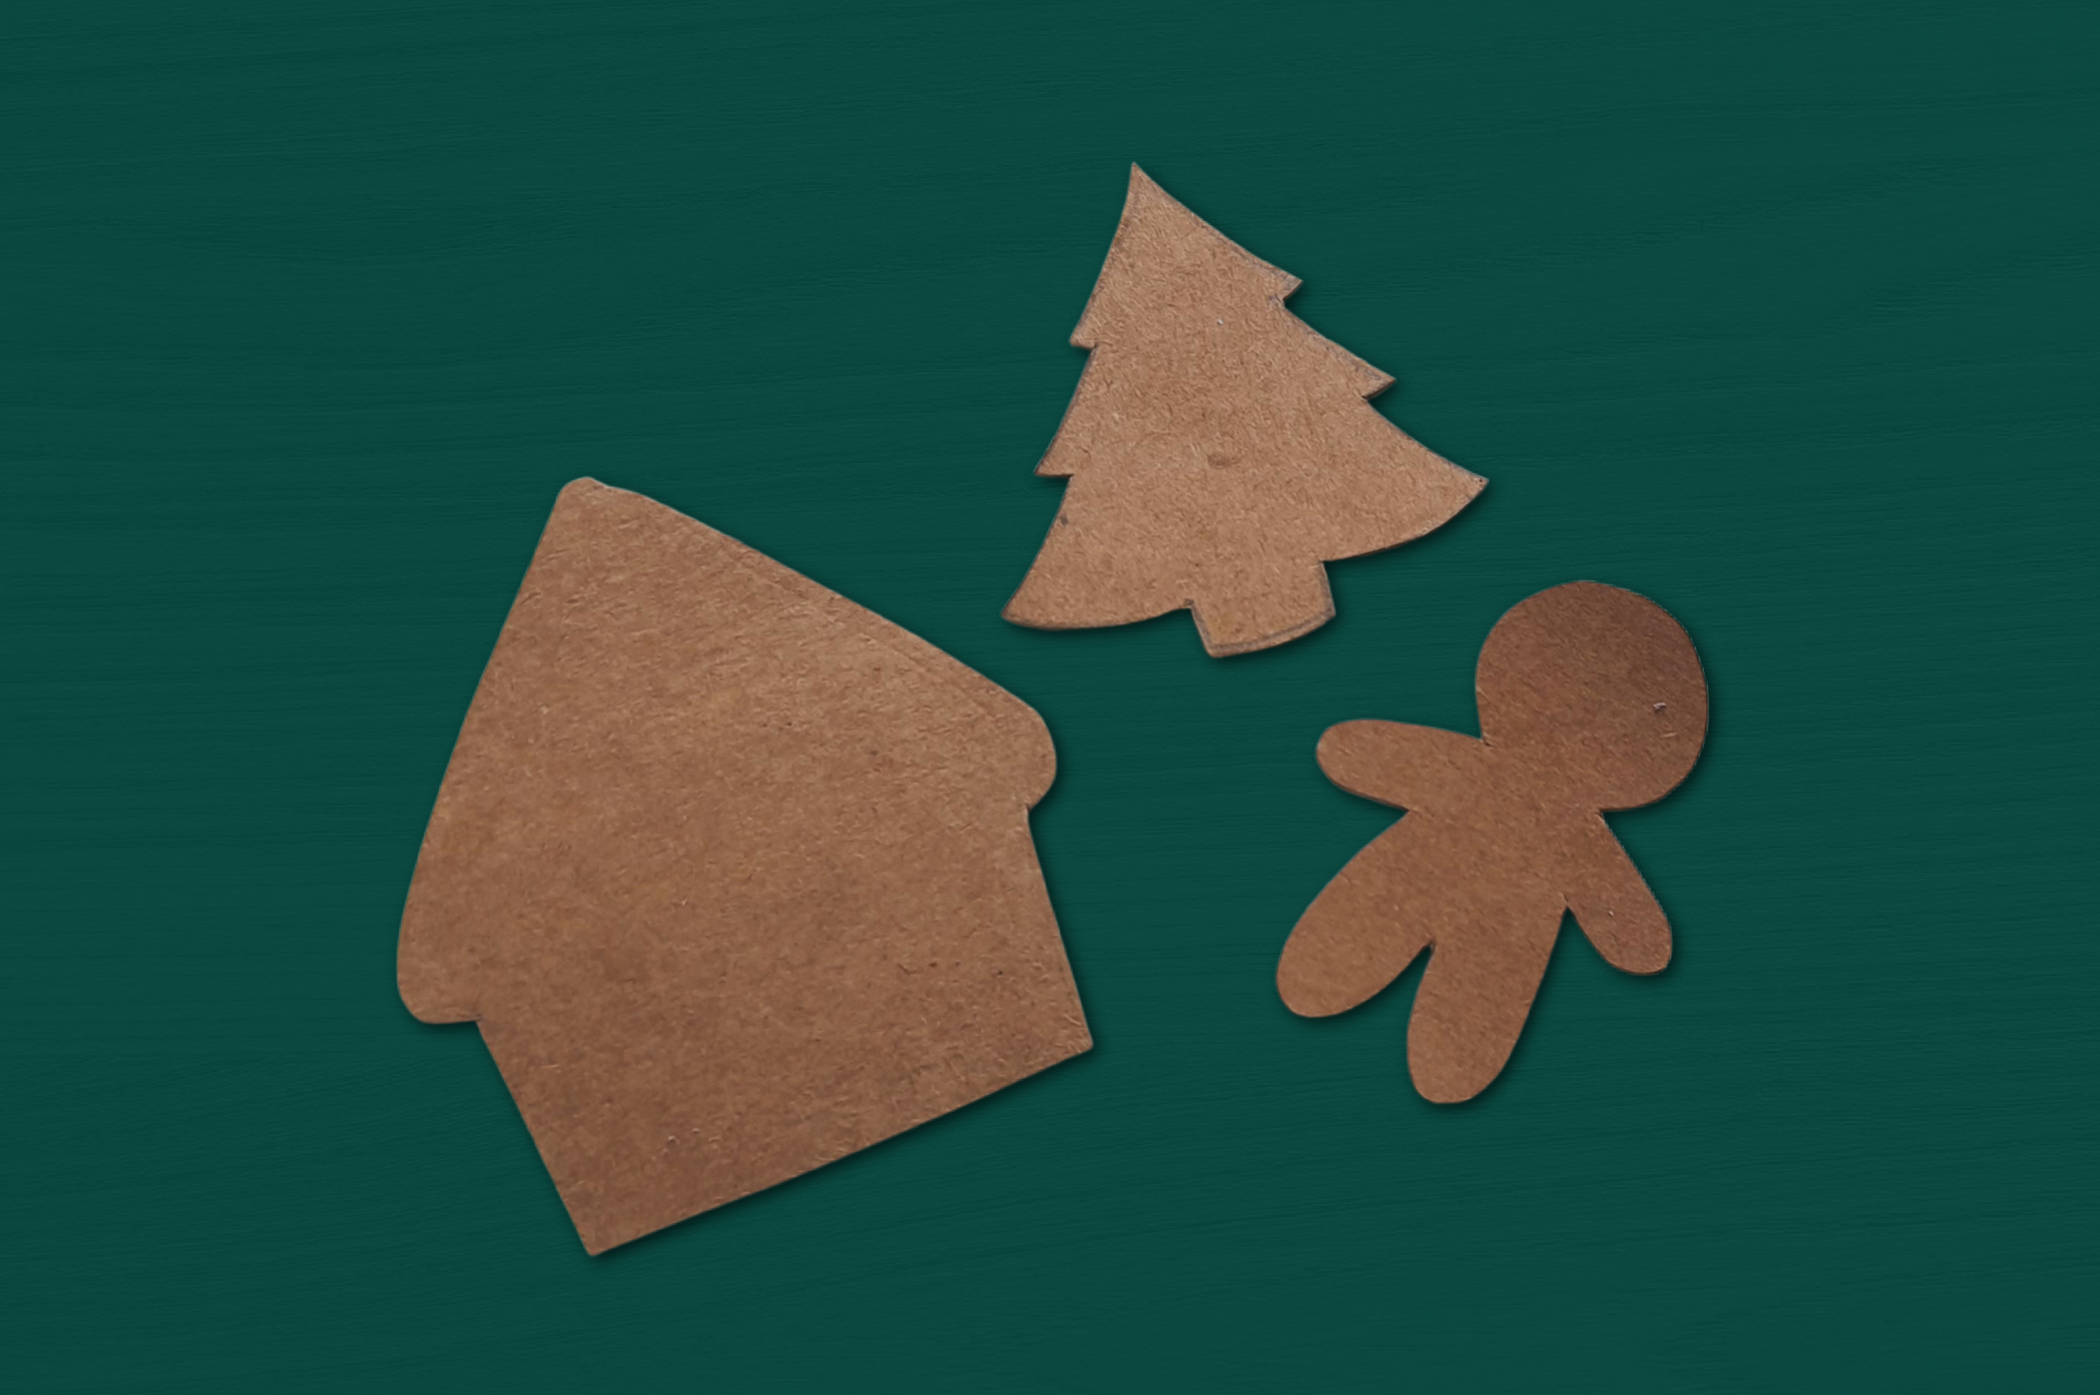 undecorated paper gingerbread ornaments on a green background